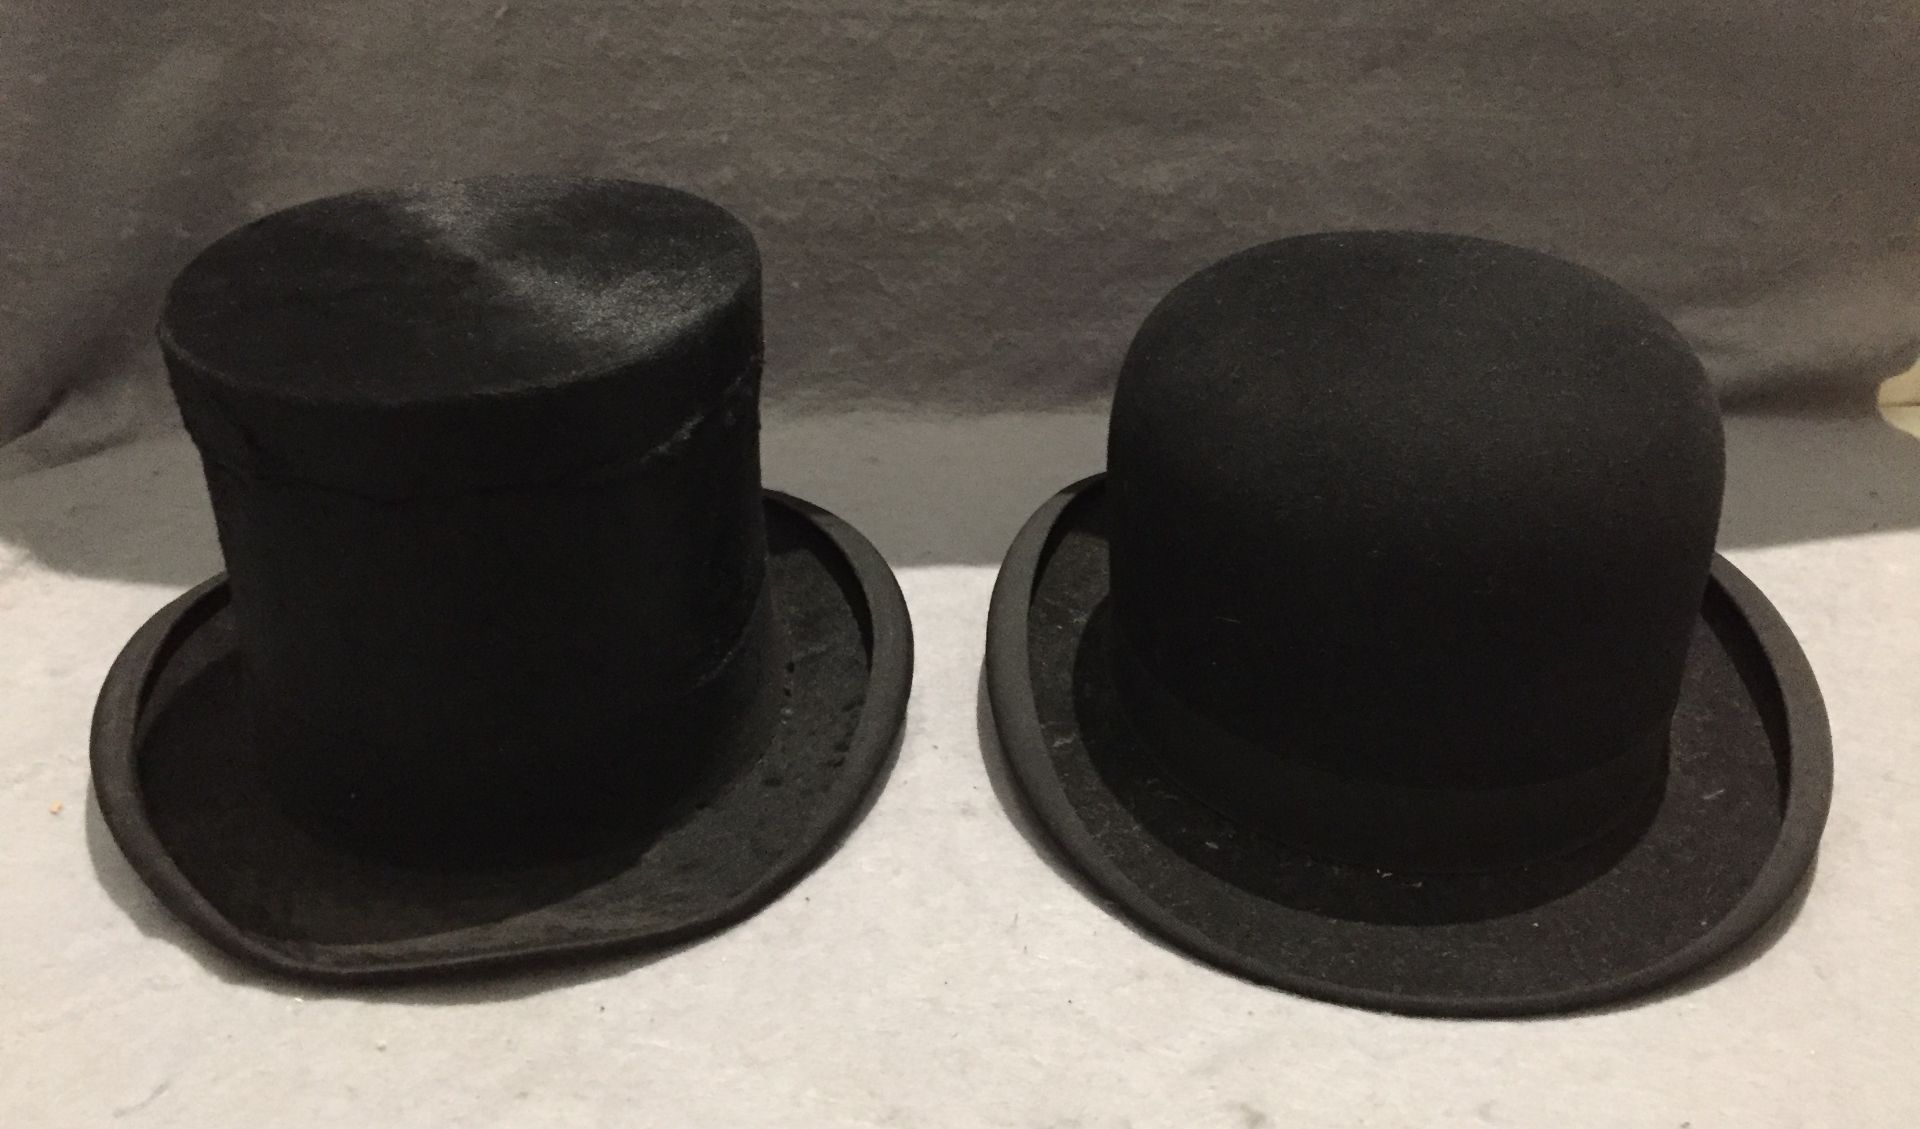 Dunn & Co long oval bowler hat and Battersby & Co top hat size 6 5/8